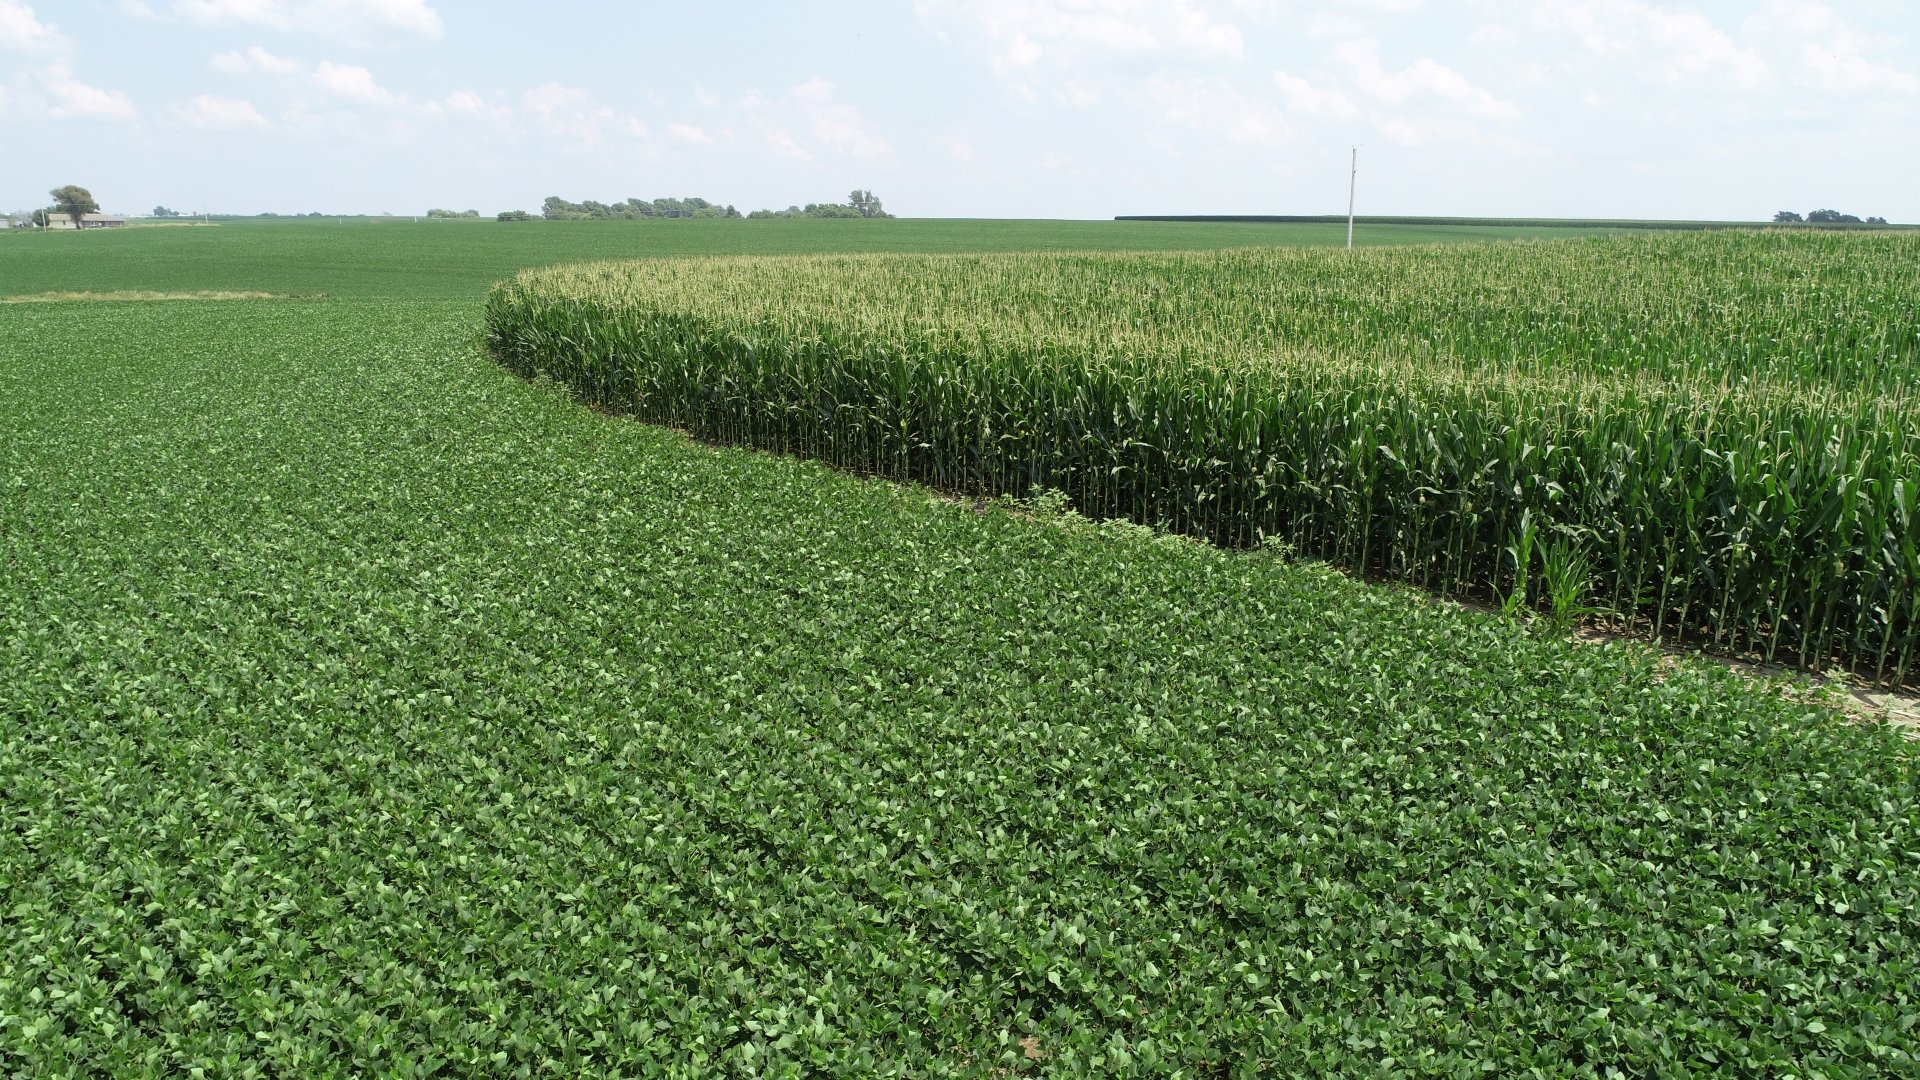 July 2020 - Corn and Soybean Crops